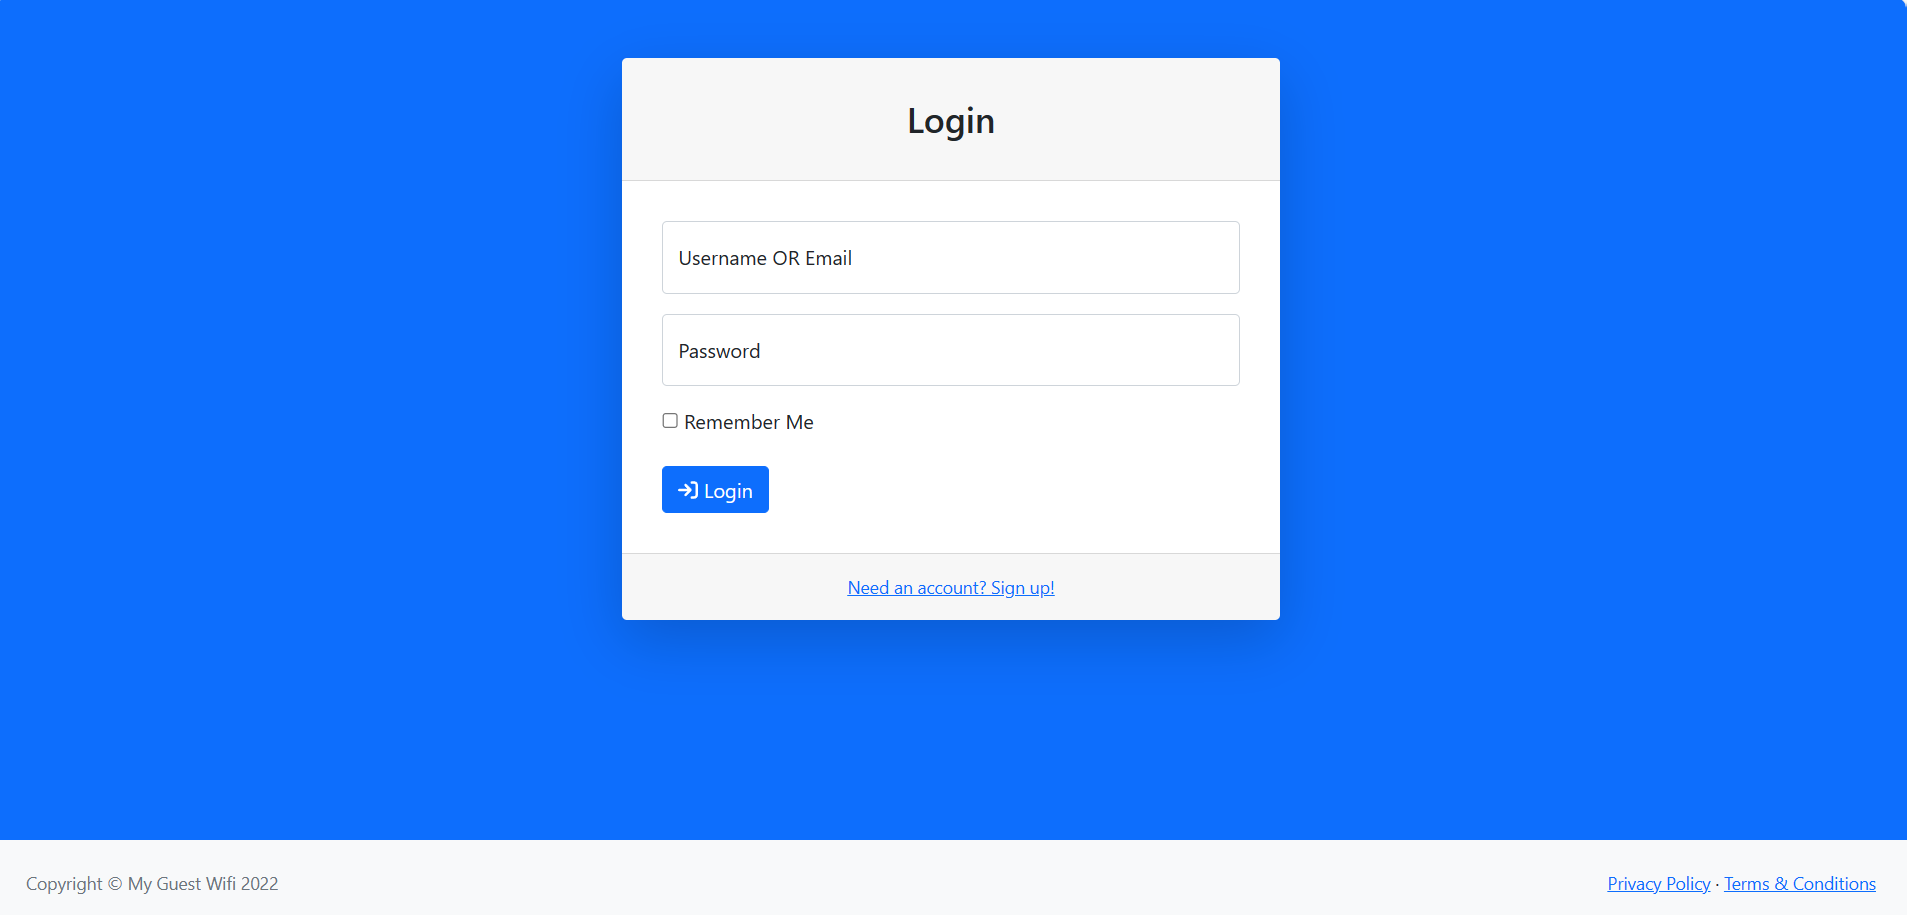 my guest wifi user interface built with Bootstrap 5